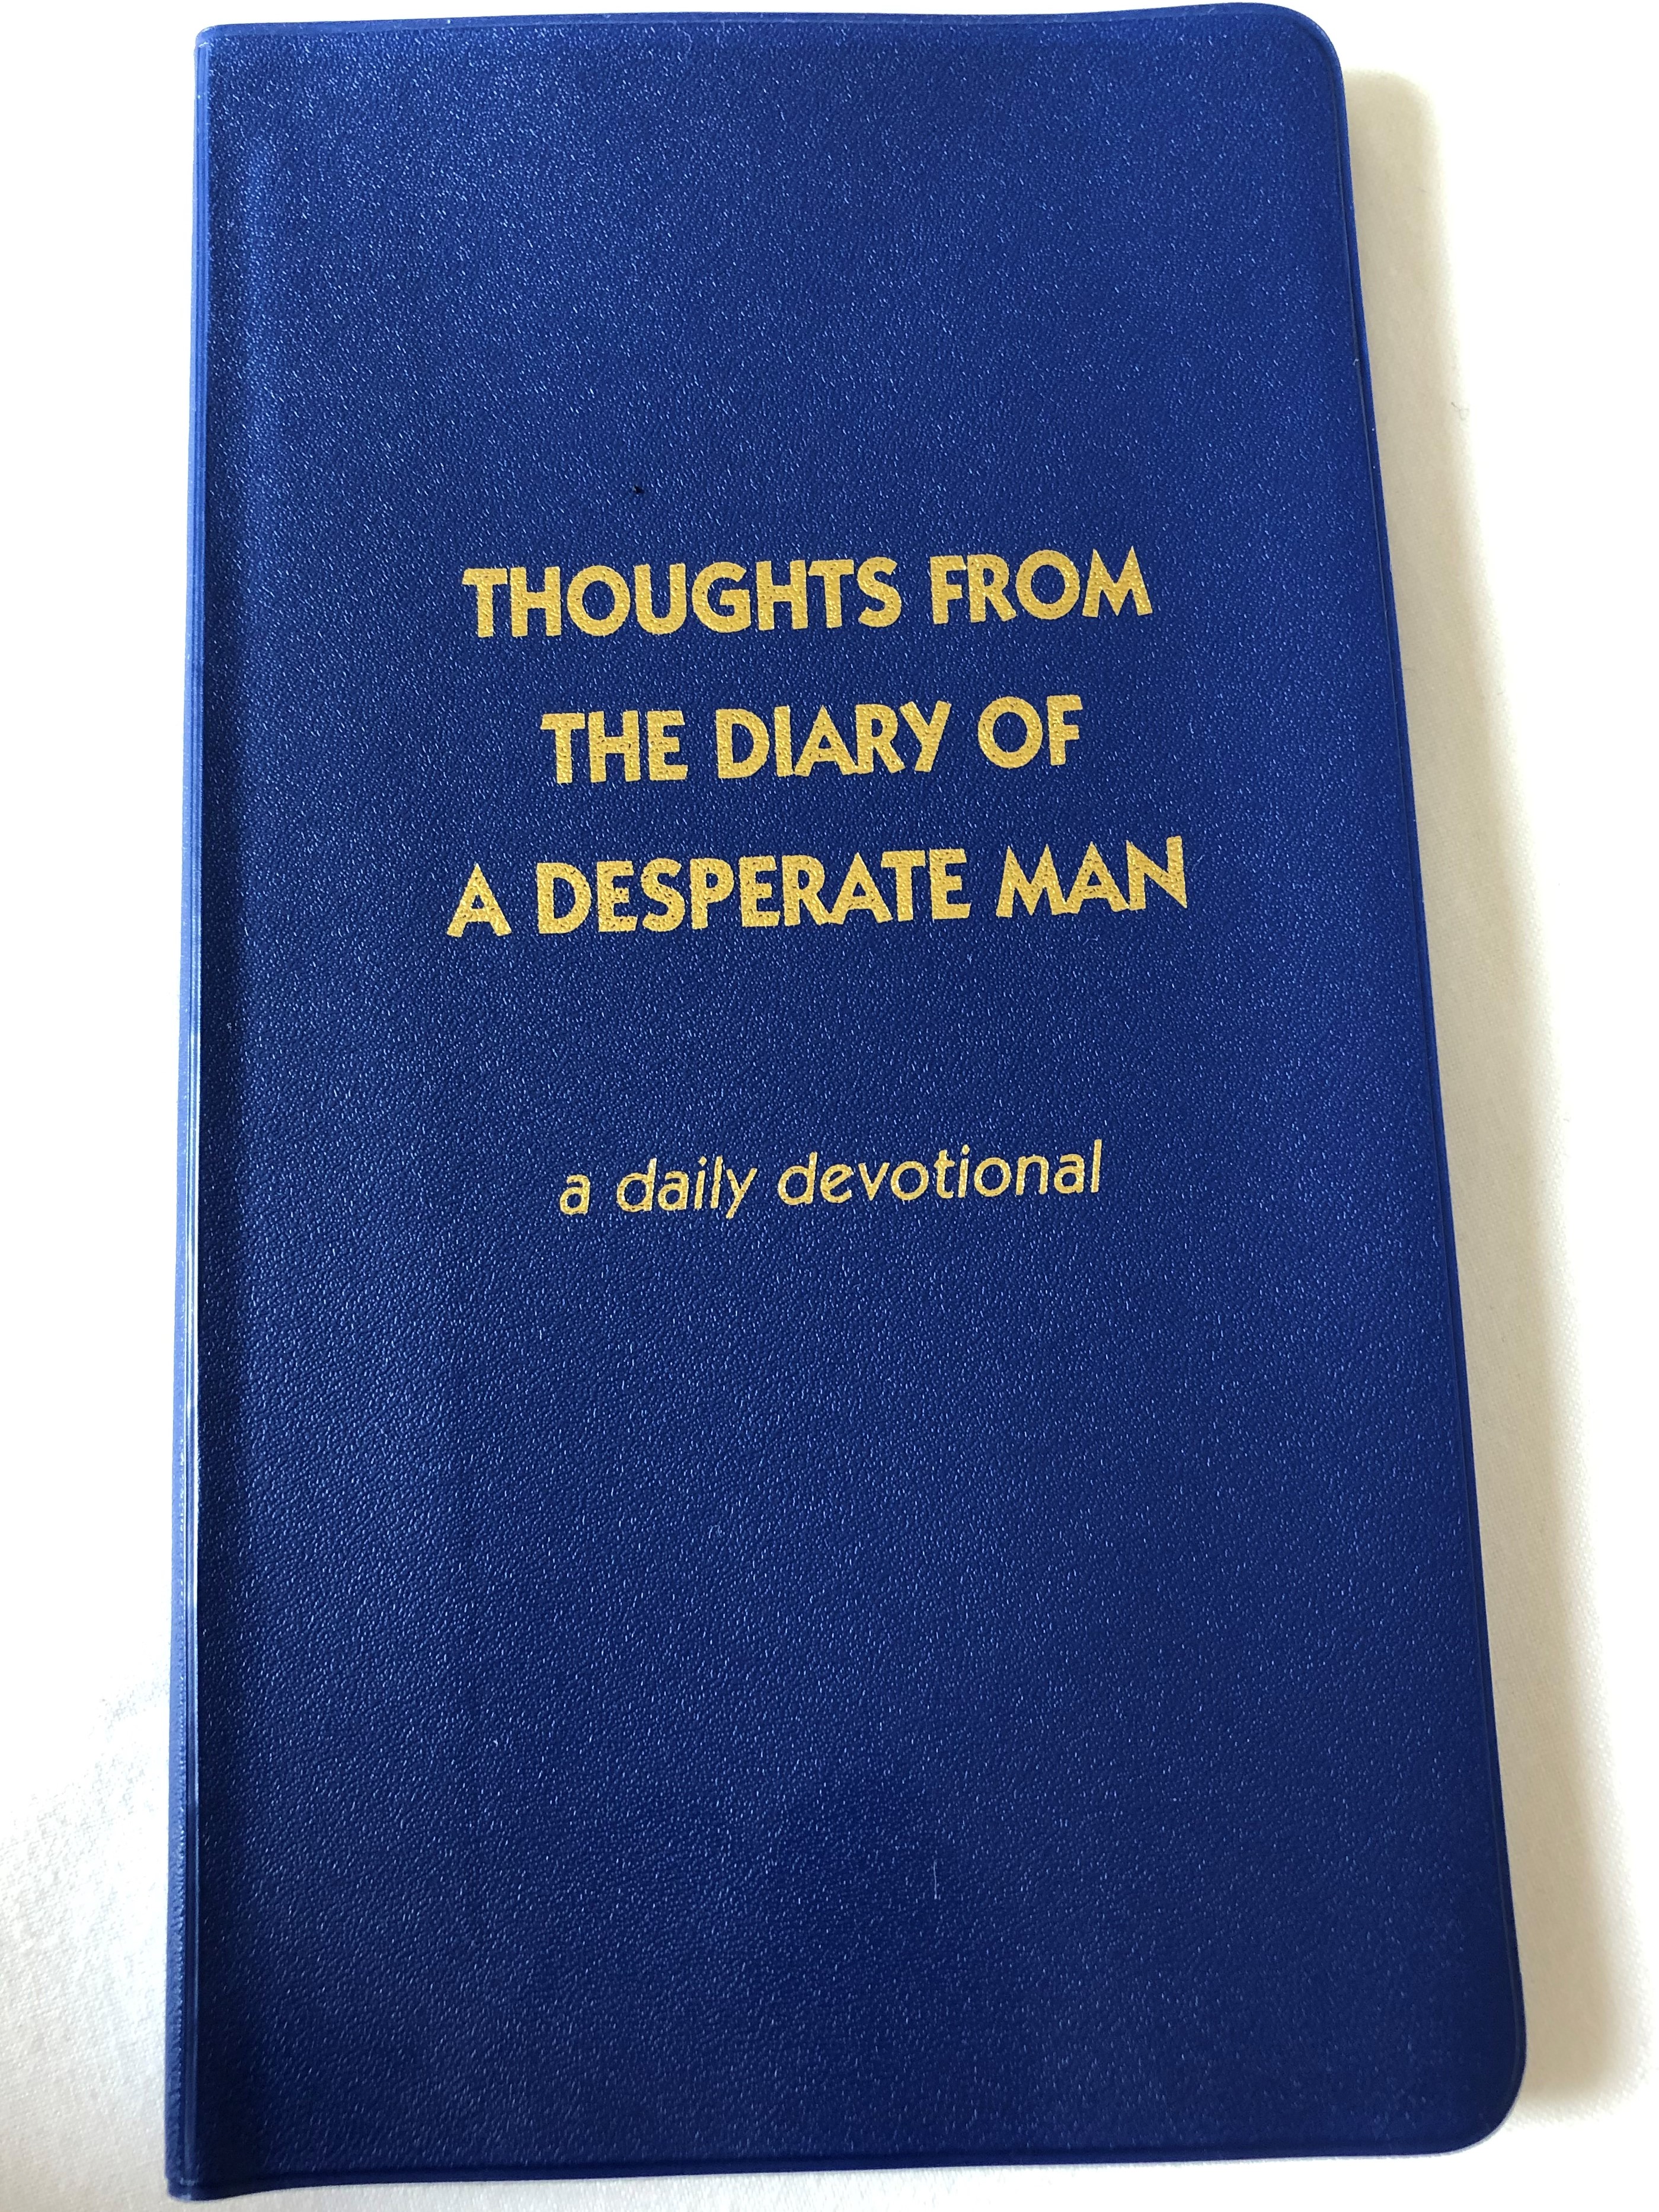 thoughts-from-the-diary-of-a-desperate-man-a-daily-devotional-by-walter-a.-henrichsen-12th-edition-leadership-foundation-blue-pvc-cover-2011-1-.jpg